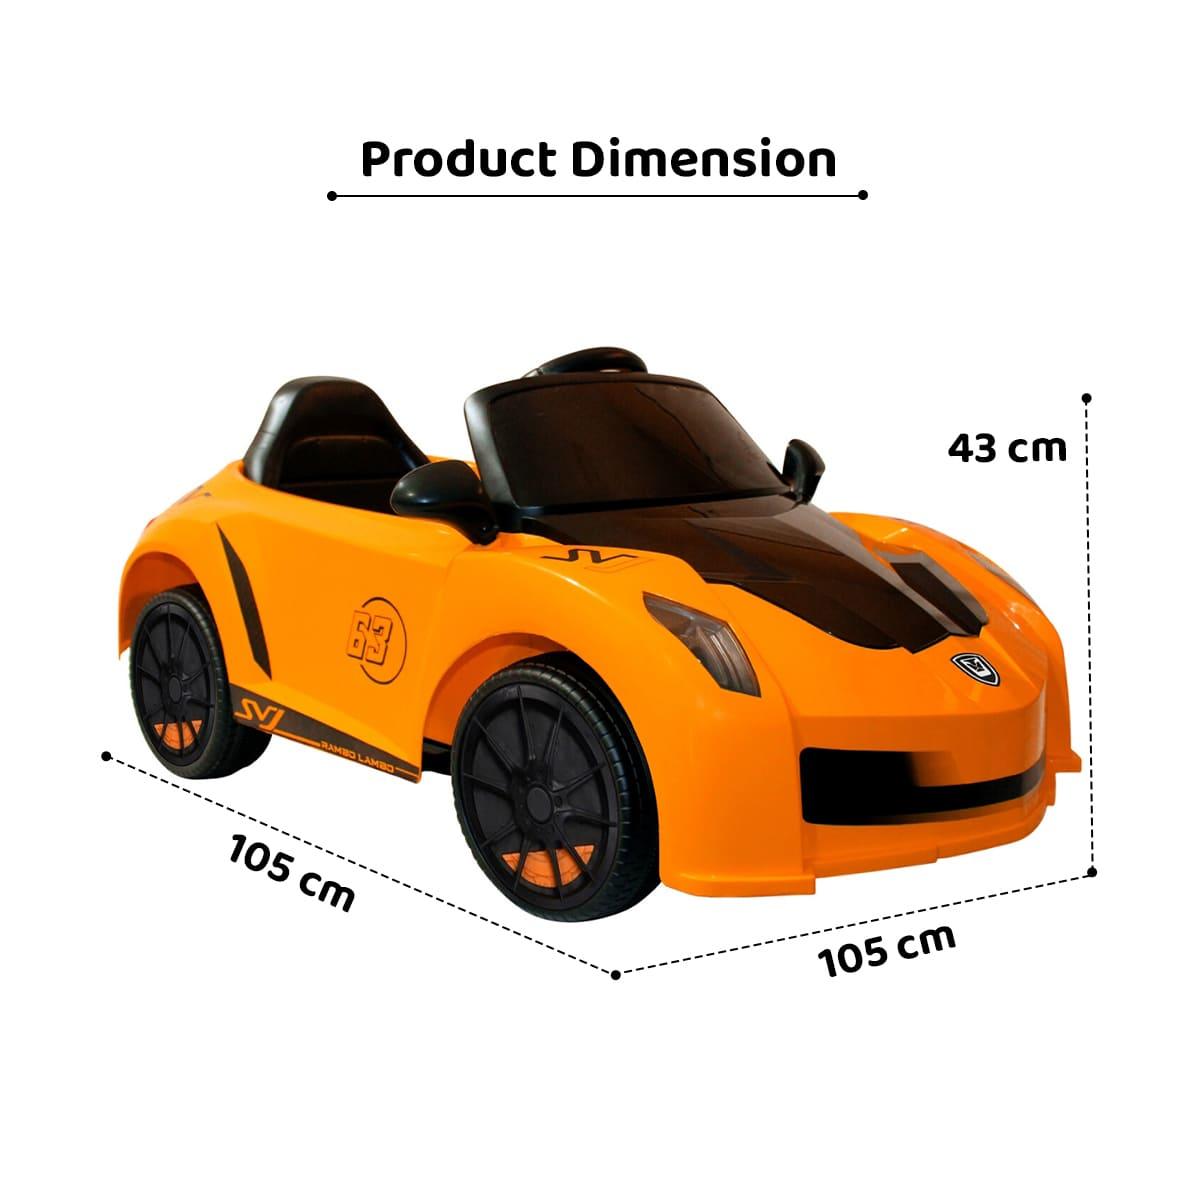 PATOYS | Rambo - Lamboo Best Electric Car for Kids, Remote with Swing Function LFC - YKL - 2688 | Orange - PATOYS